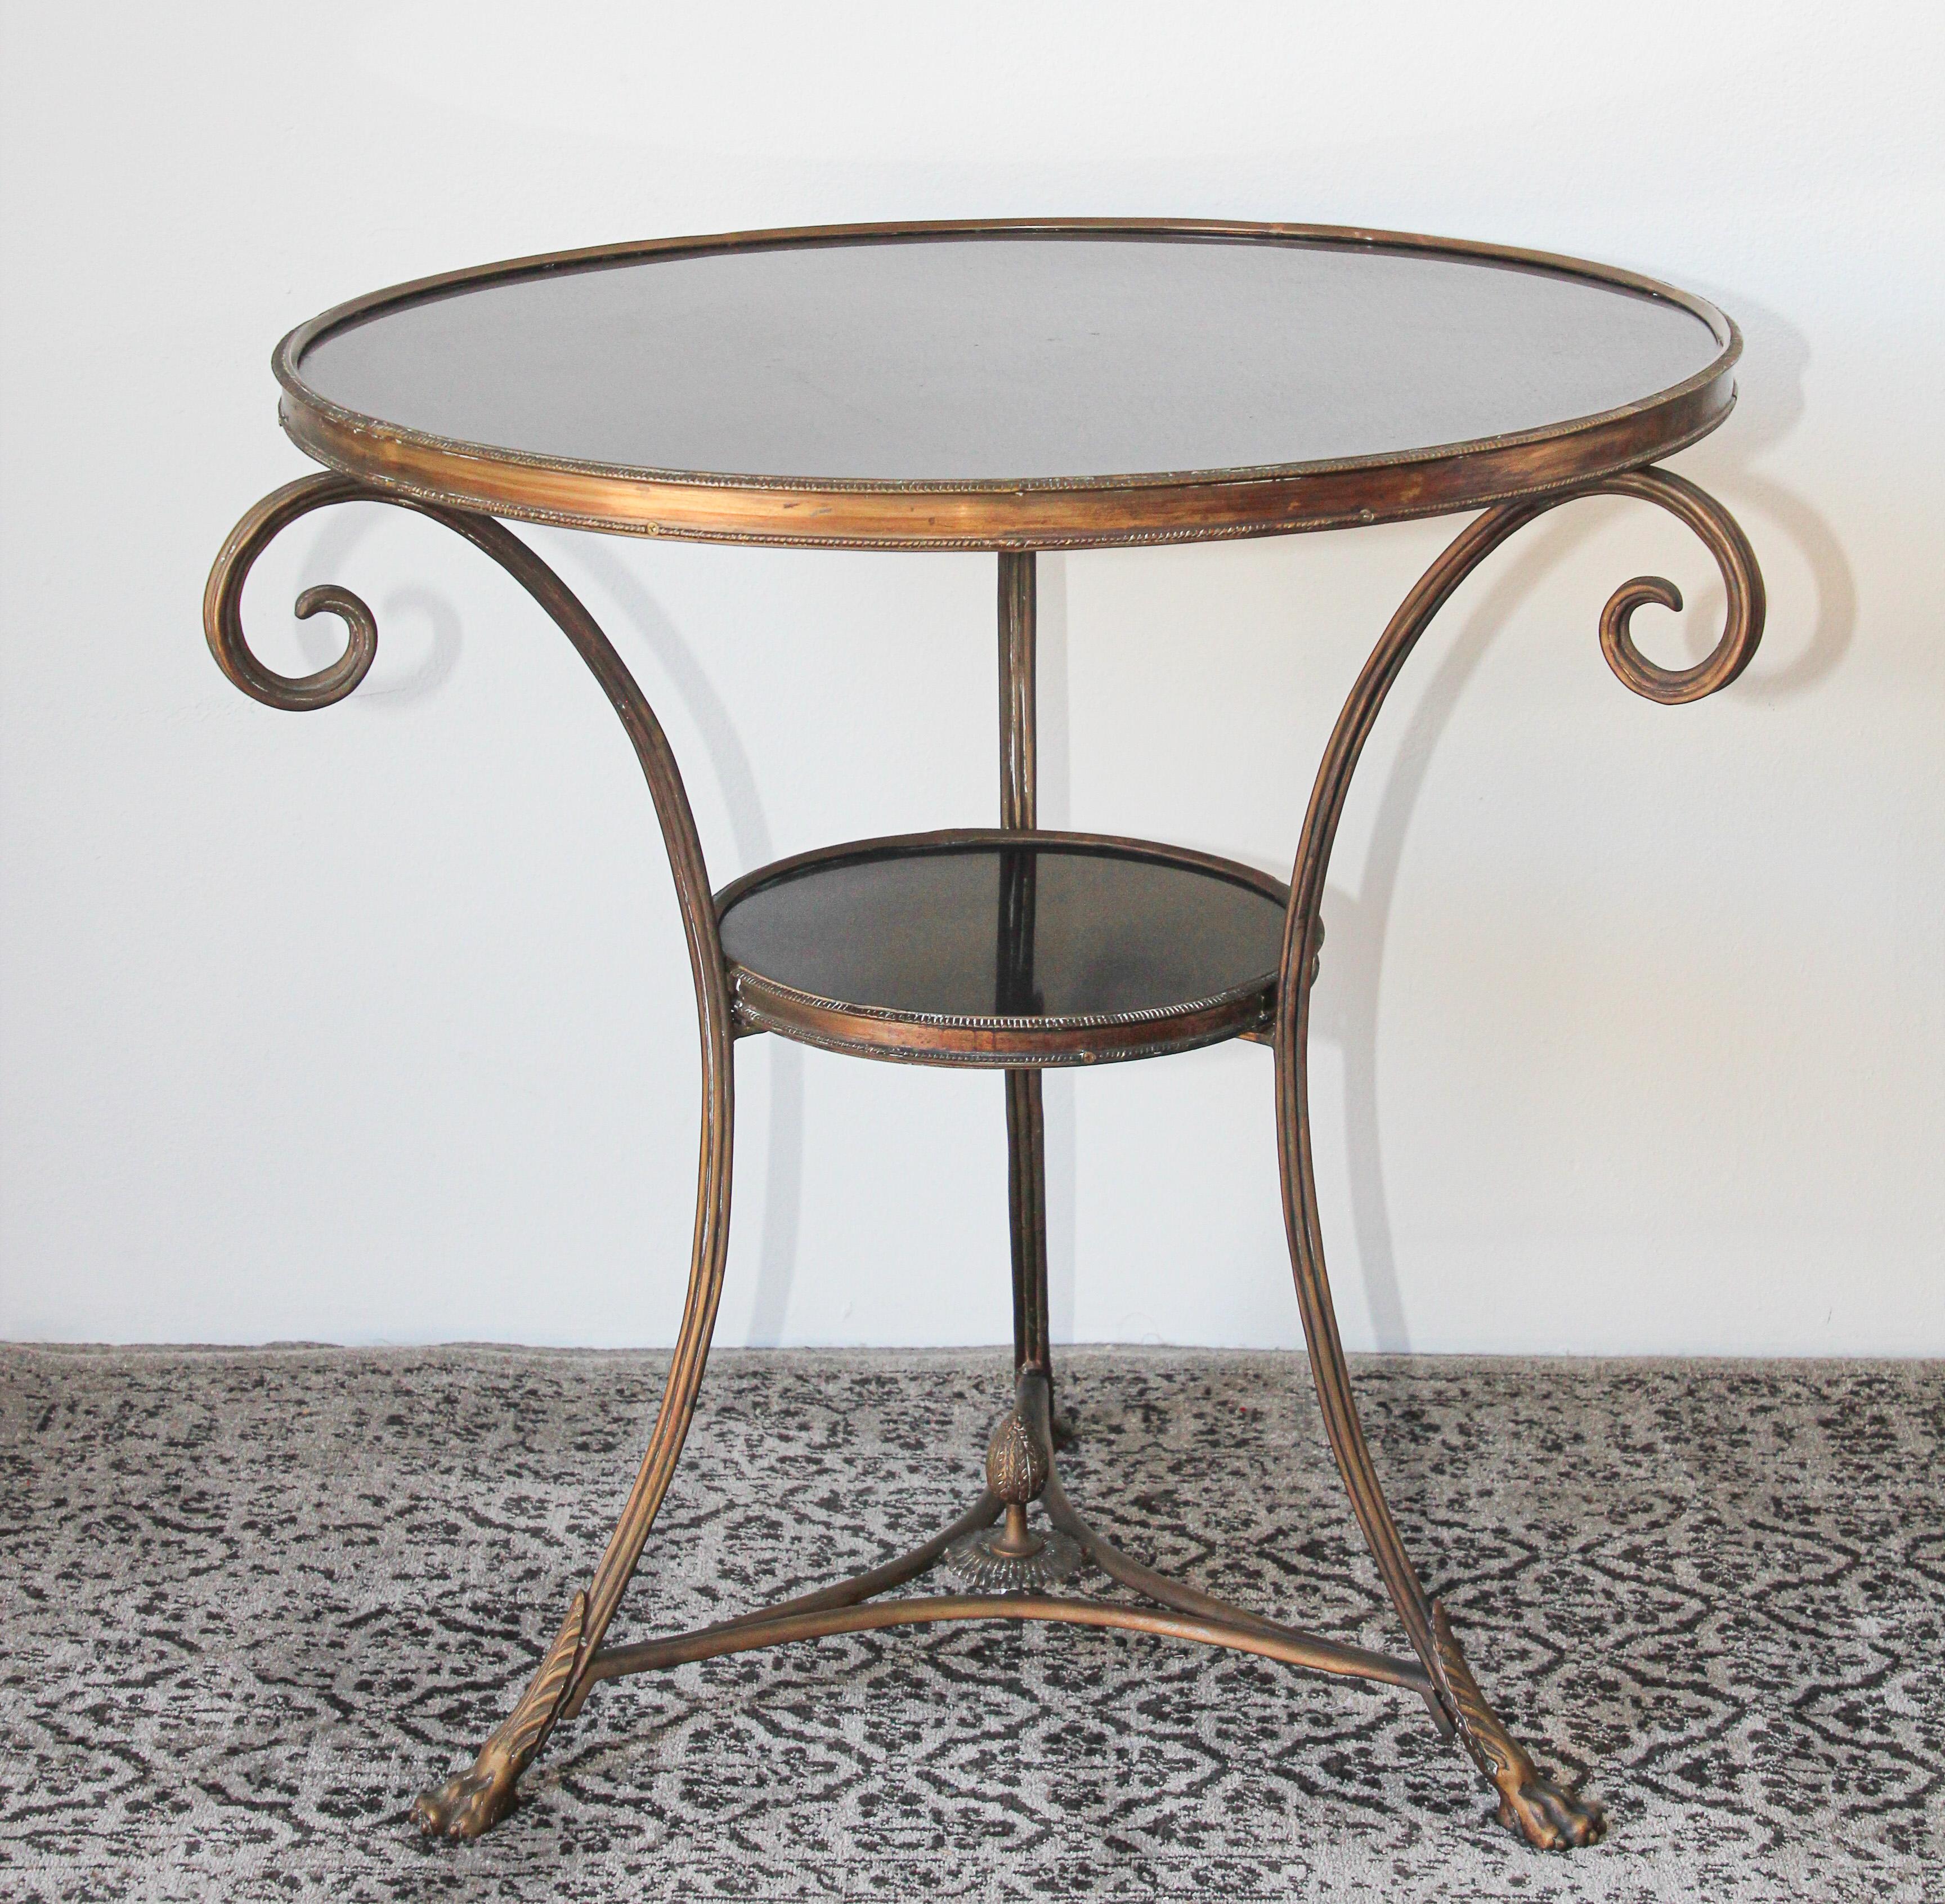 20th Century French Louis XVI Style Round Gueridon Marble Table For Sale